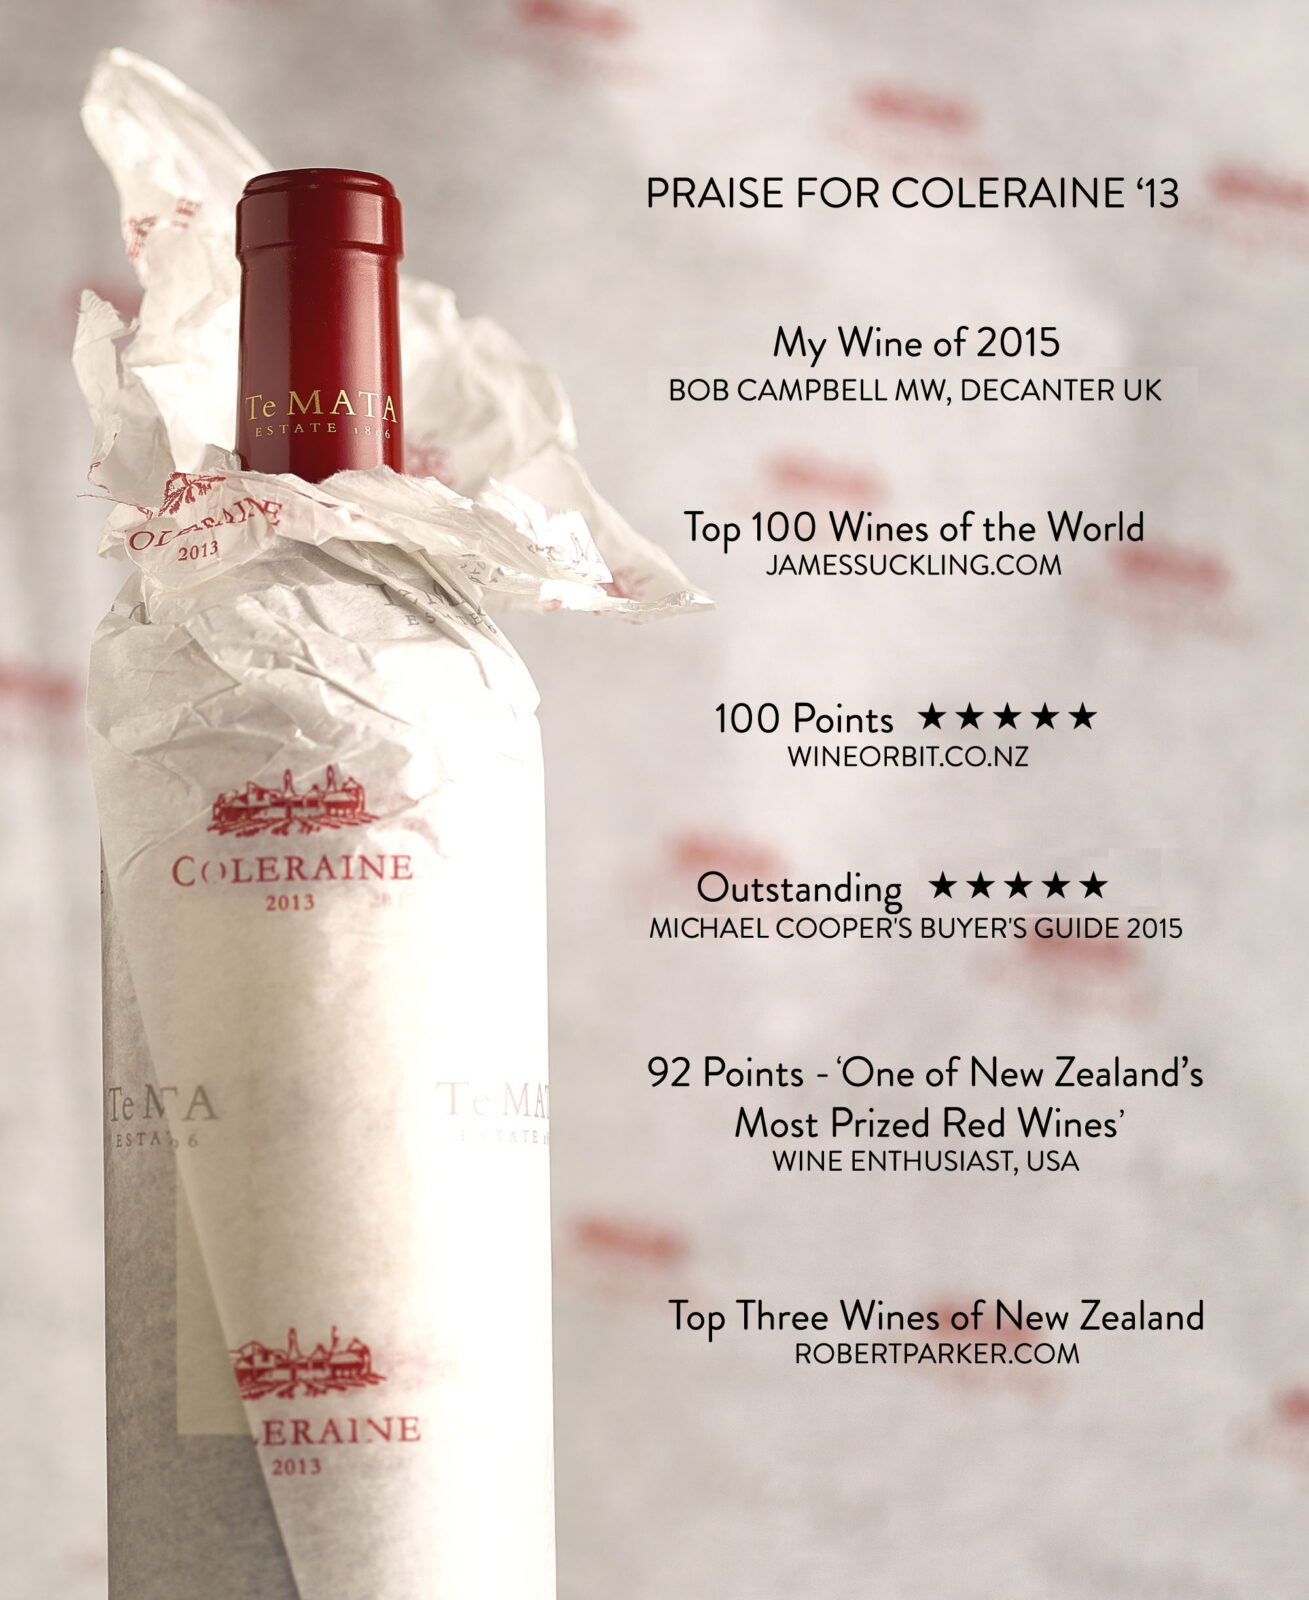 New Year’s Honours for Coleraine – ‘New Zealand’s Most Famous Red Wine’